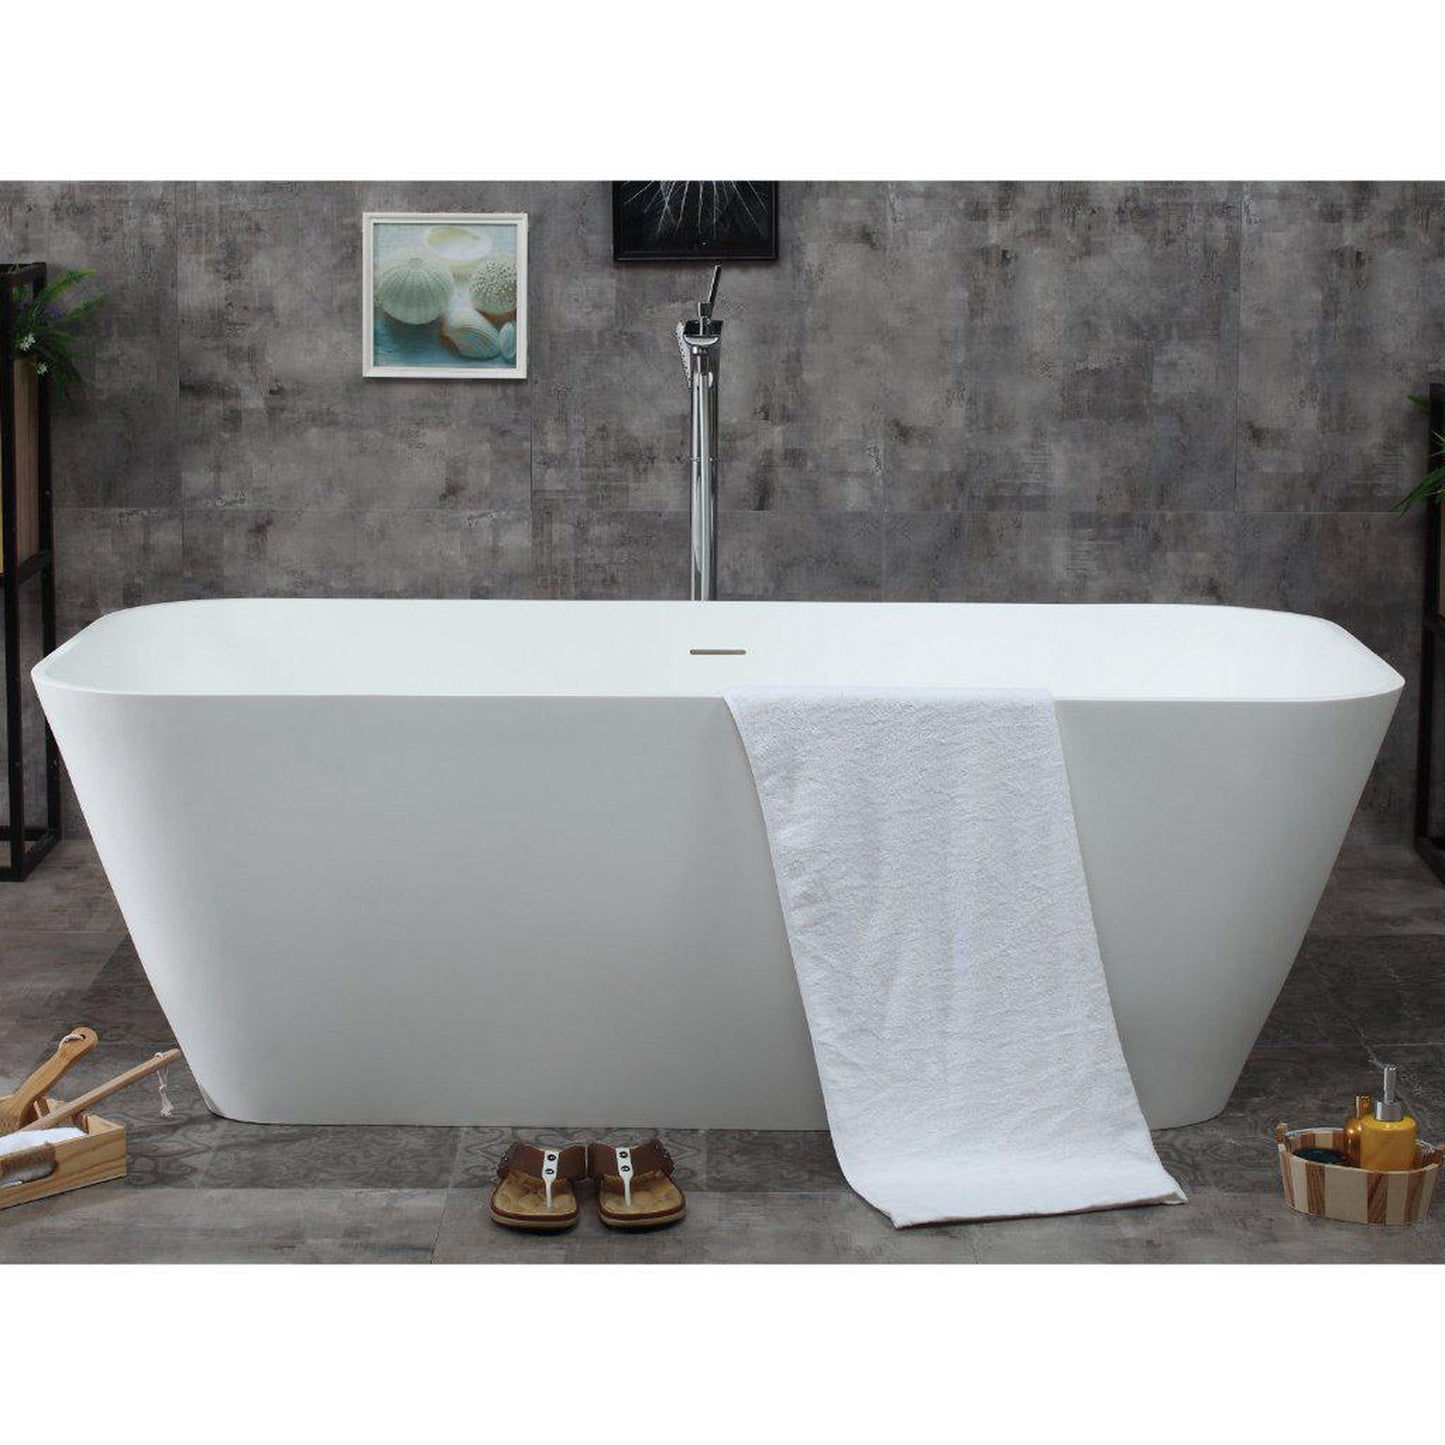 ALFI Brand AB9952 67" One Person Freestanding White Rectangle Solid Surface Smooth Resin Soaking Bathtub